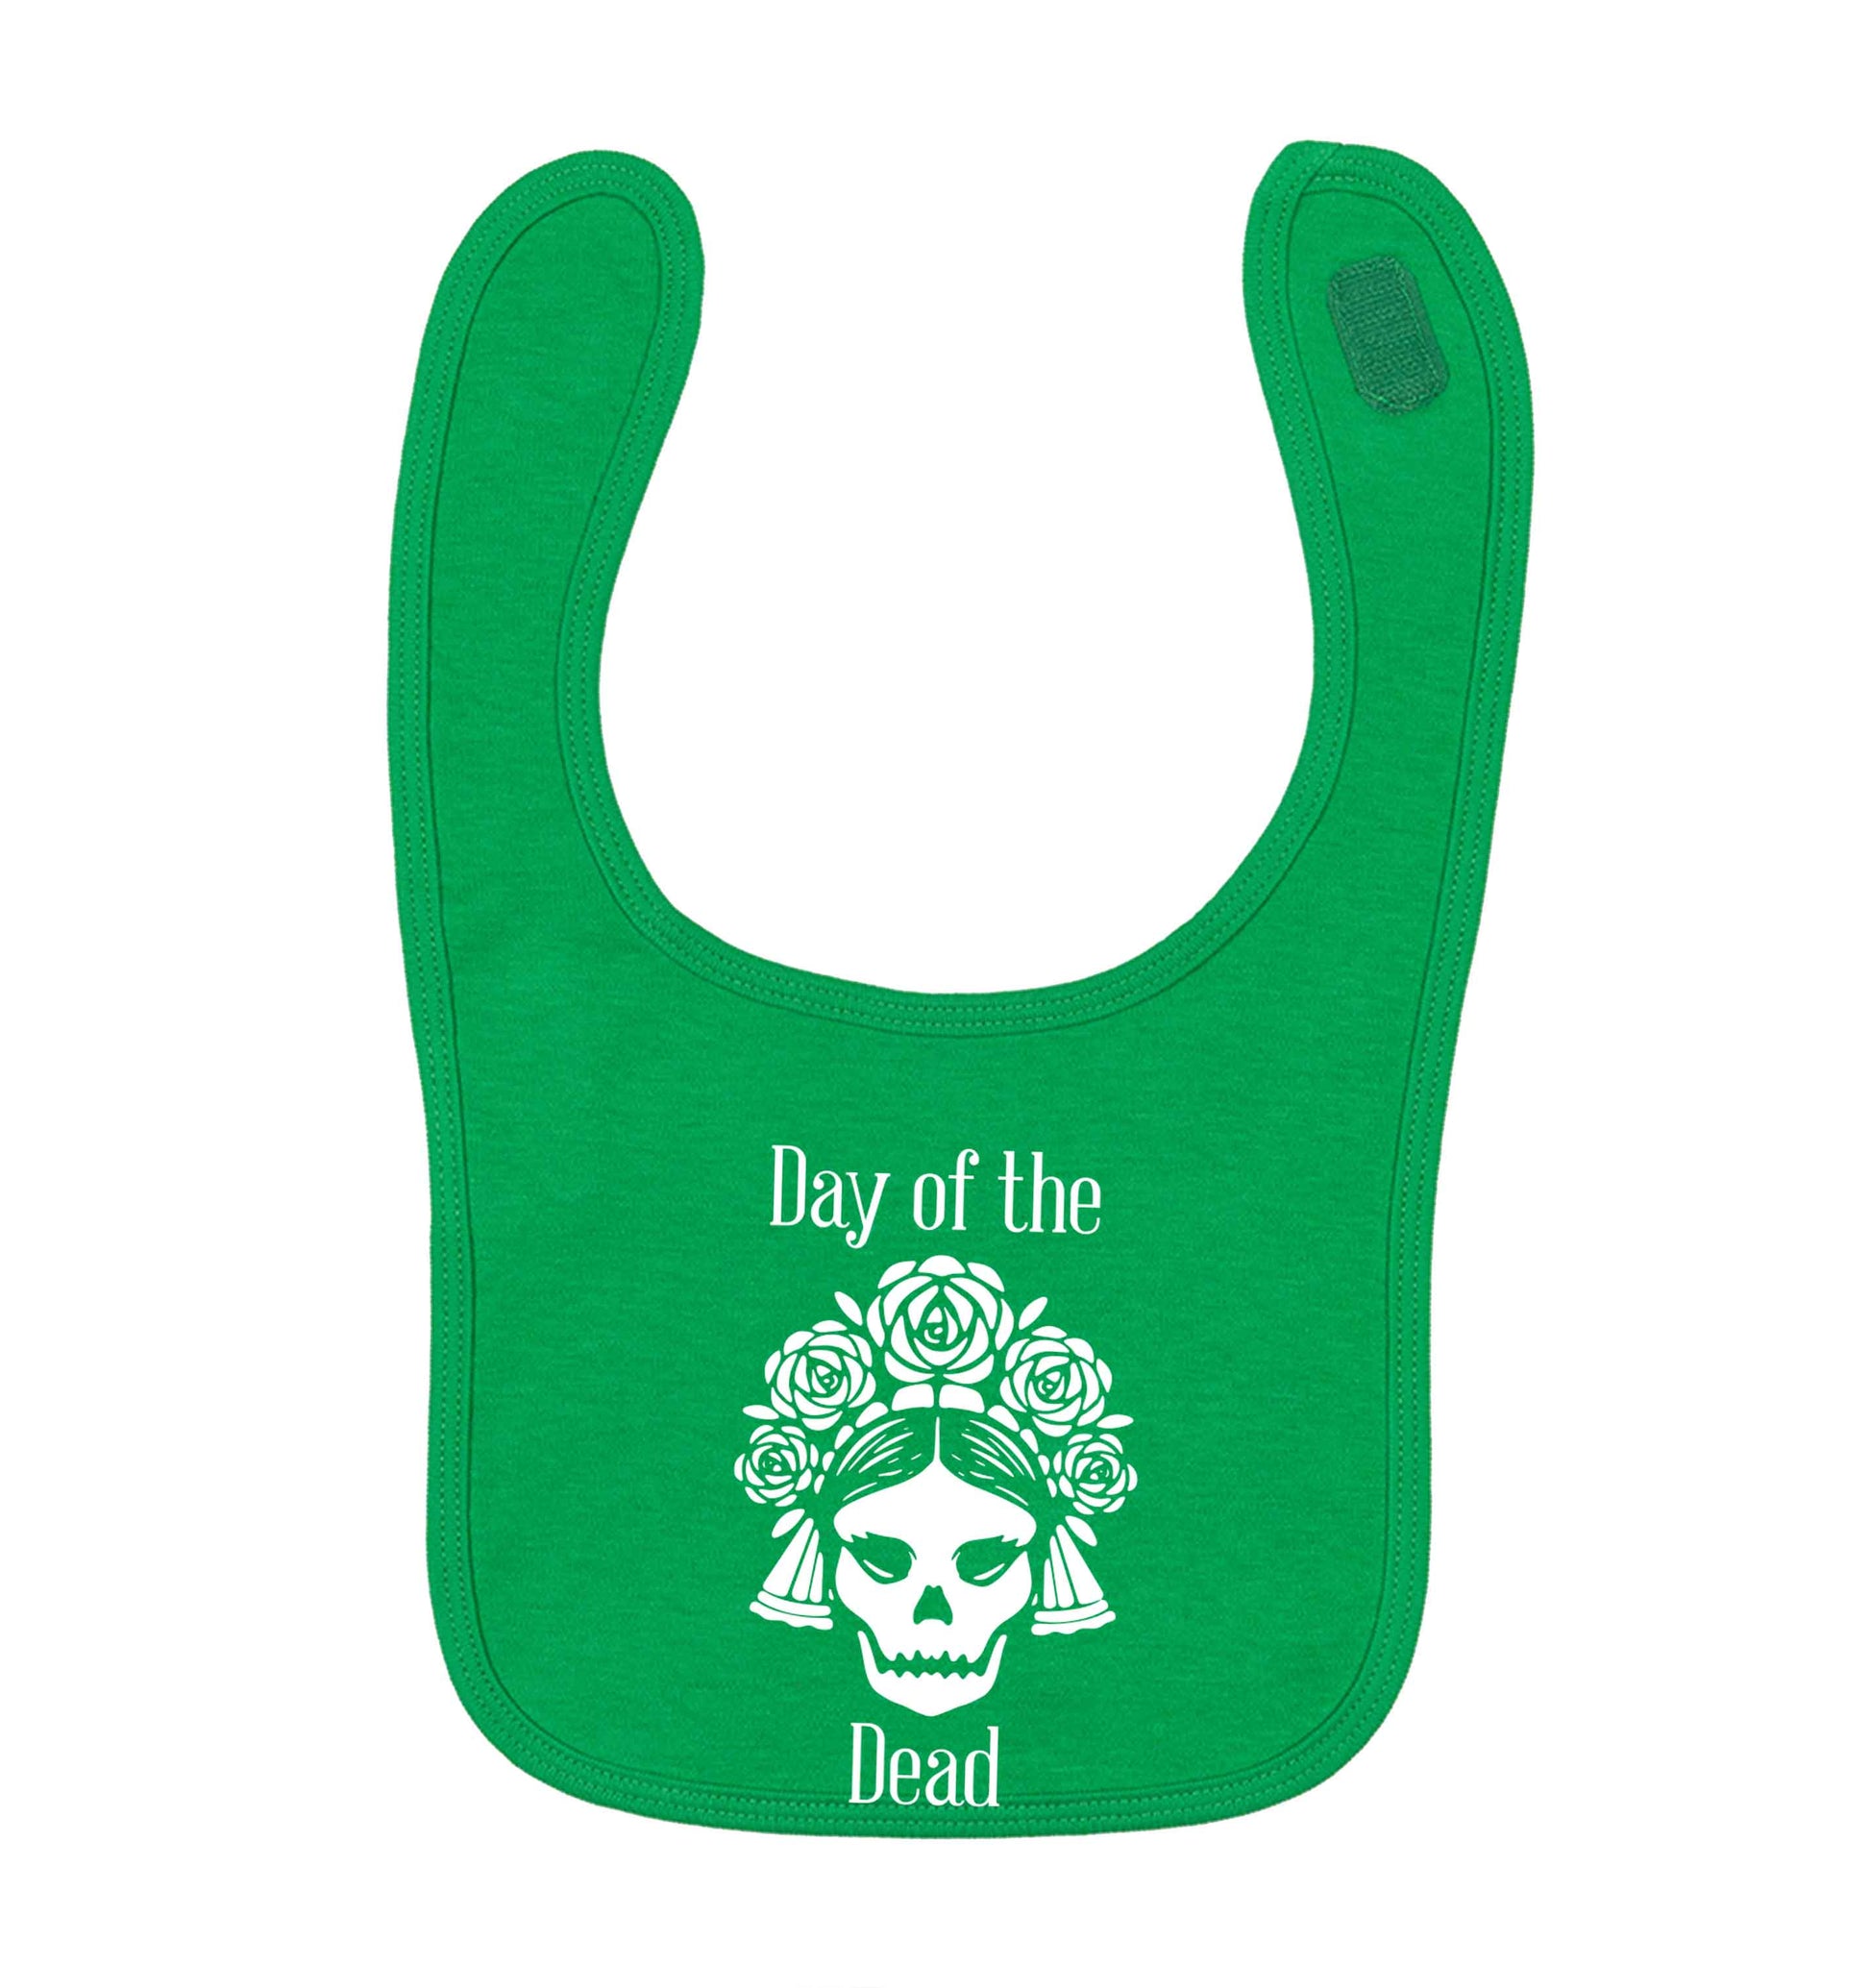 Day of the dead green baby bib